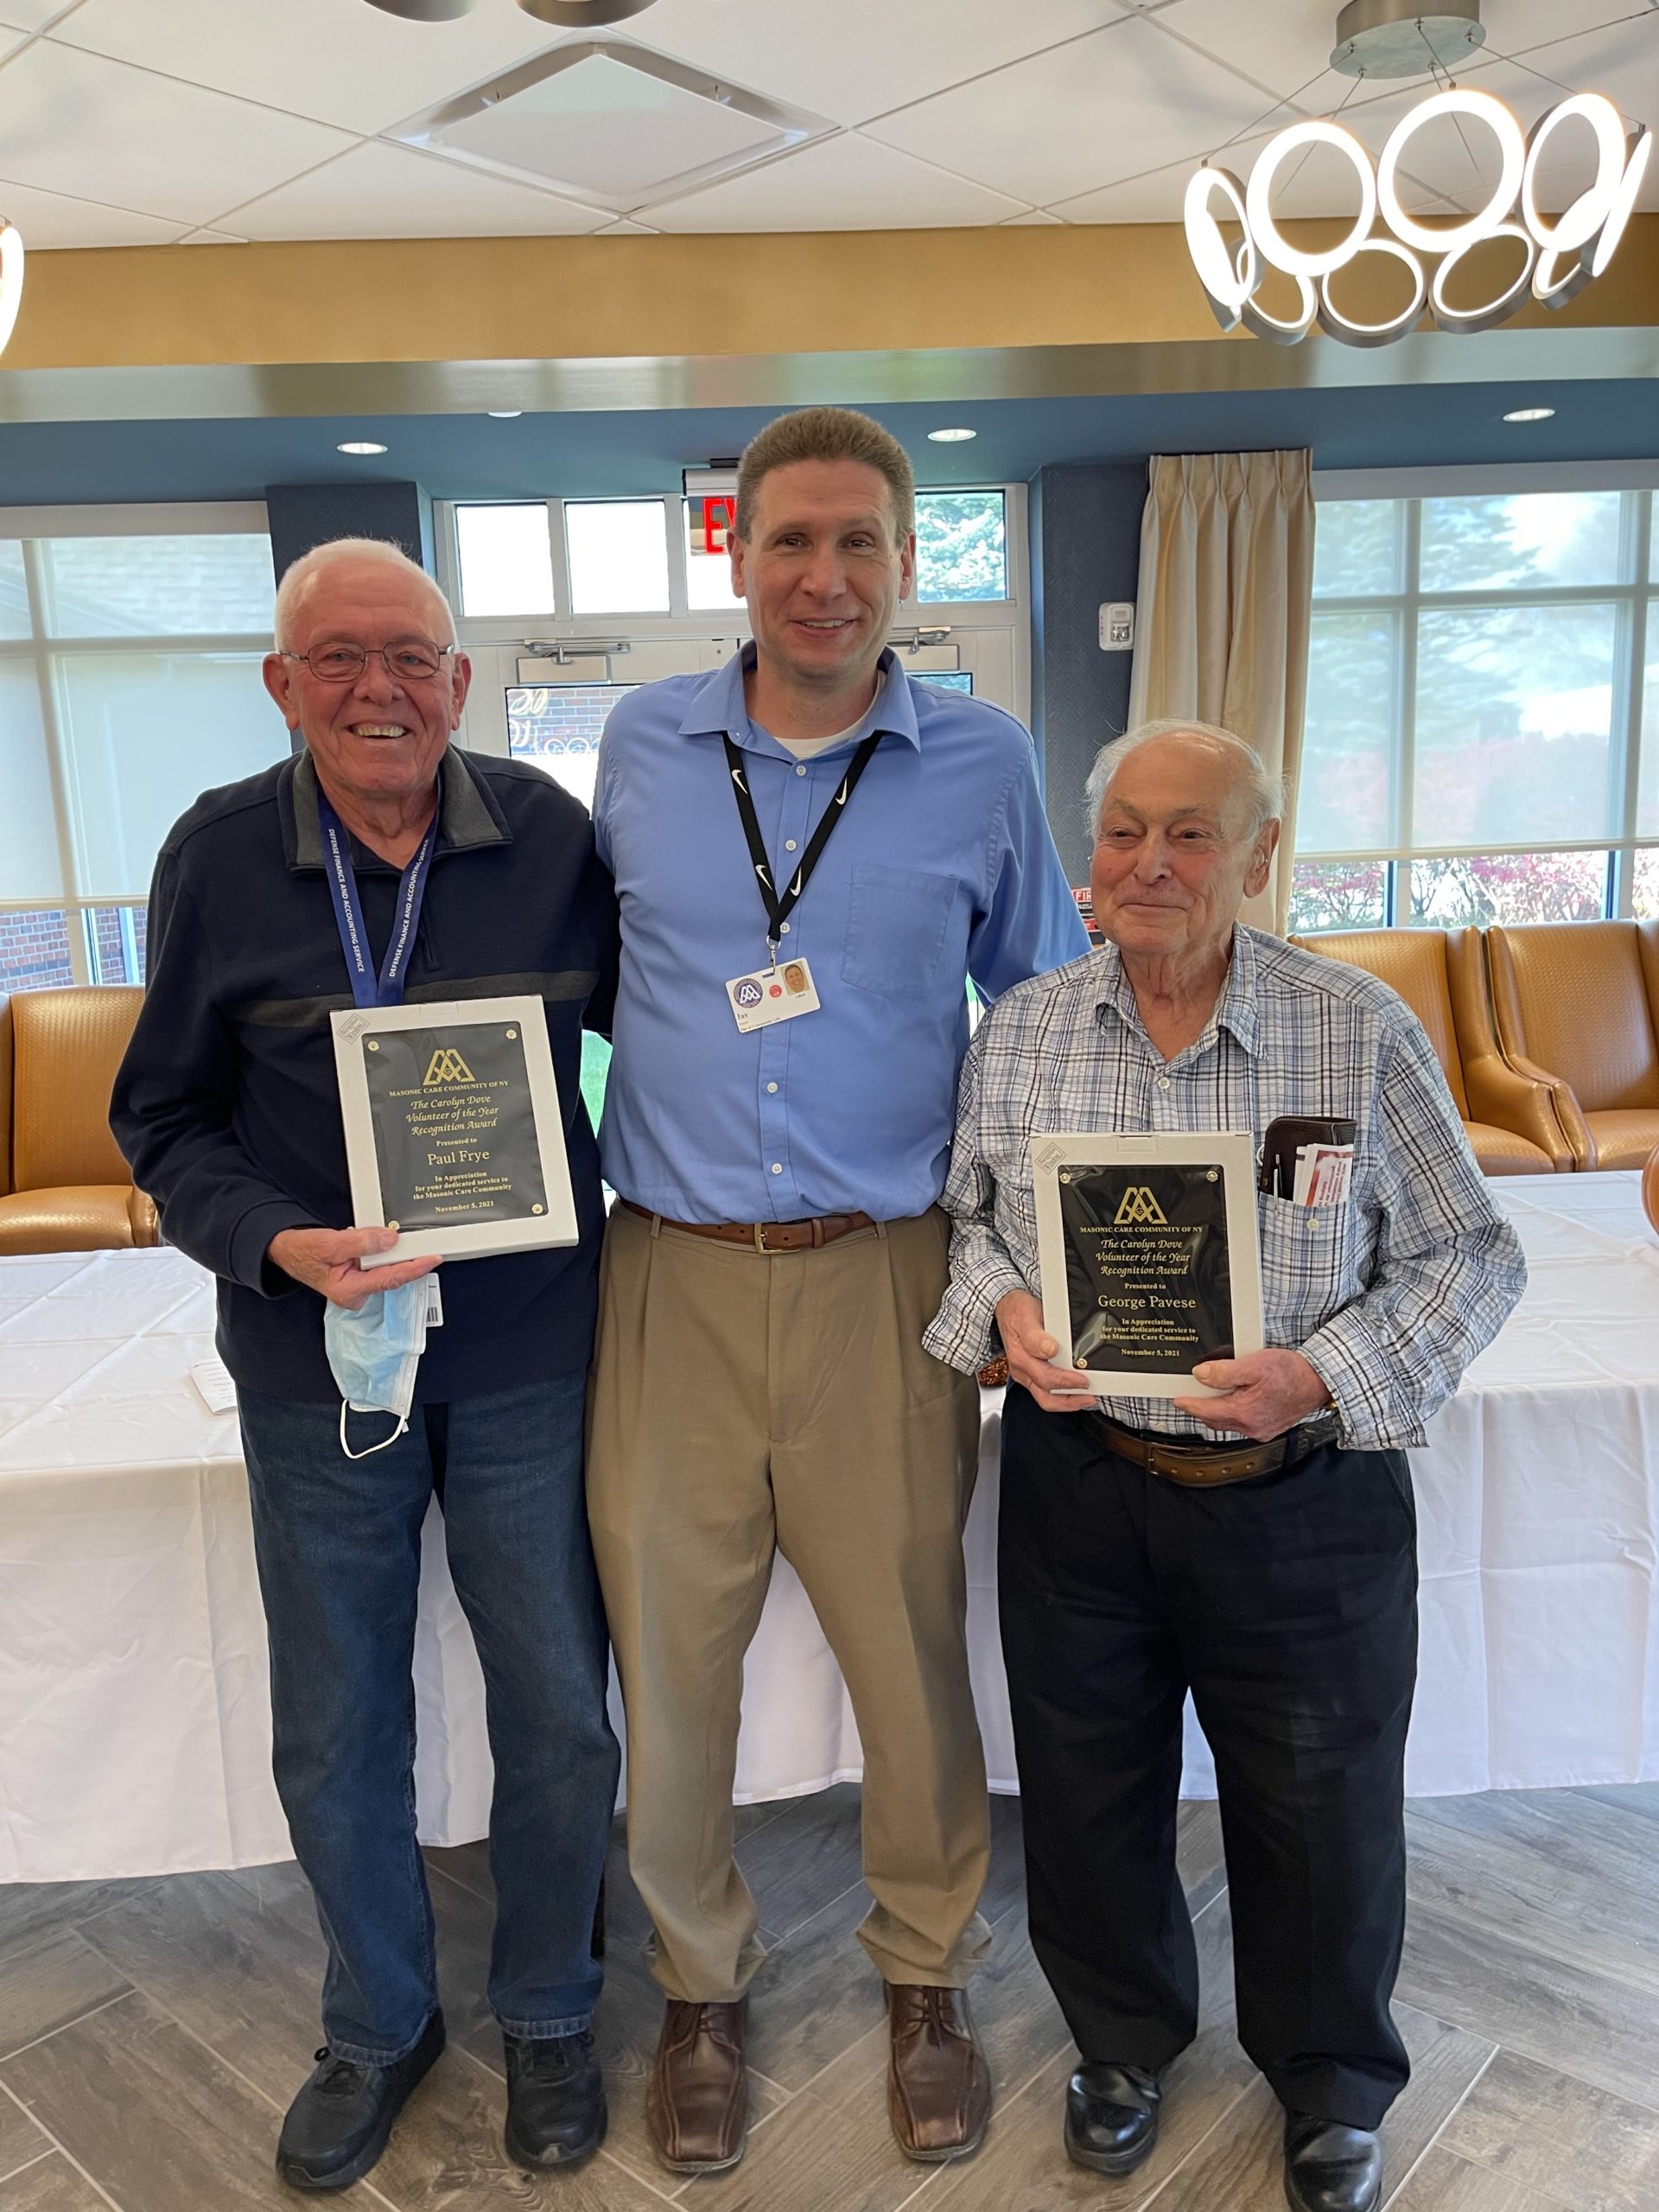 Paul and George receiving awards at Masonic Care Community